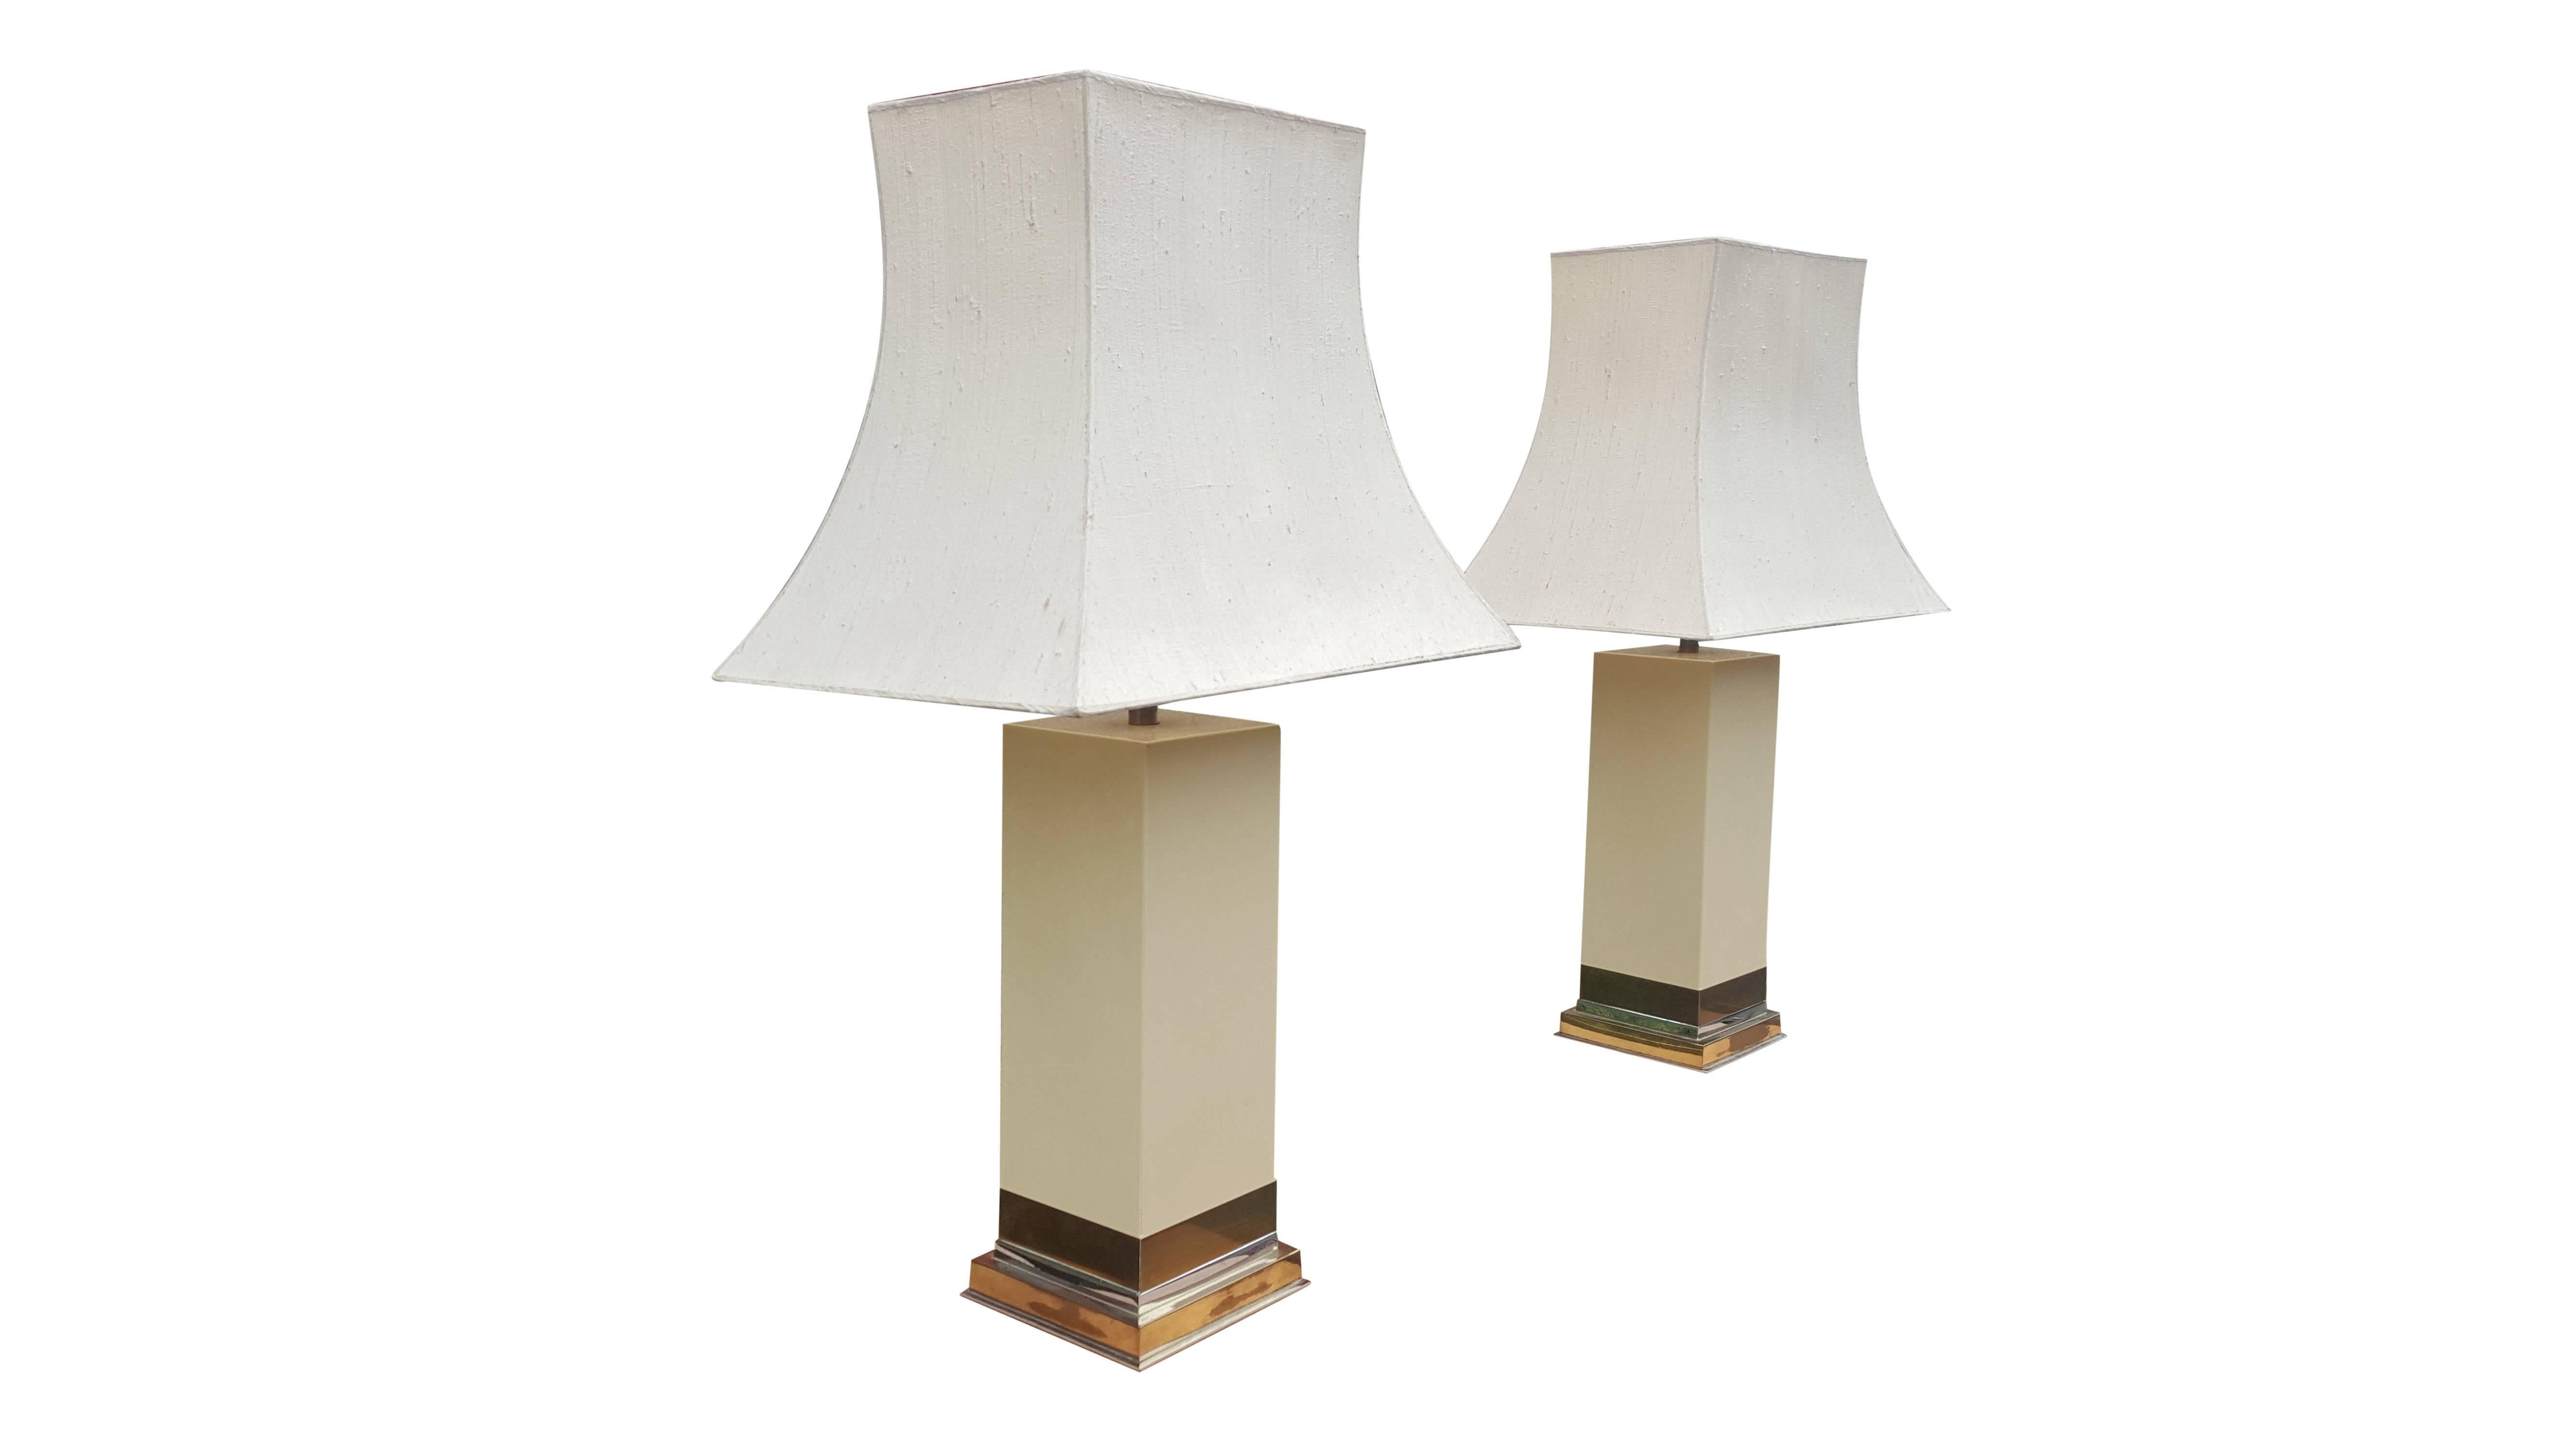 Handsome pair ivory lacquer table lamps.
Stepped plinth in alternating bands of nickel and brass.
Signed at the lower right 